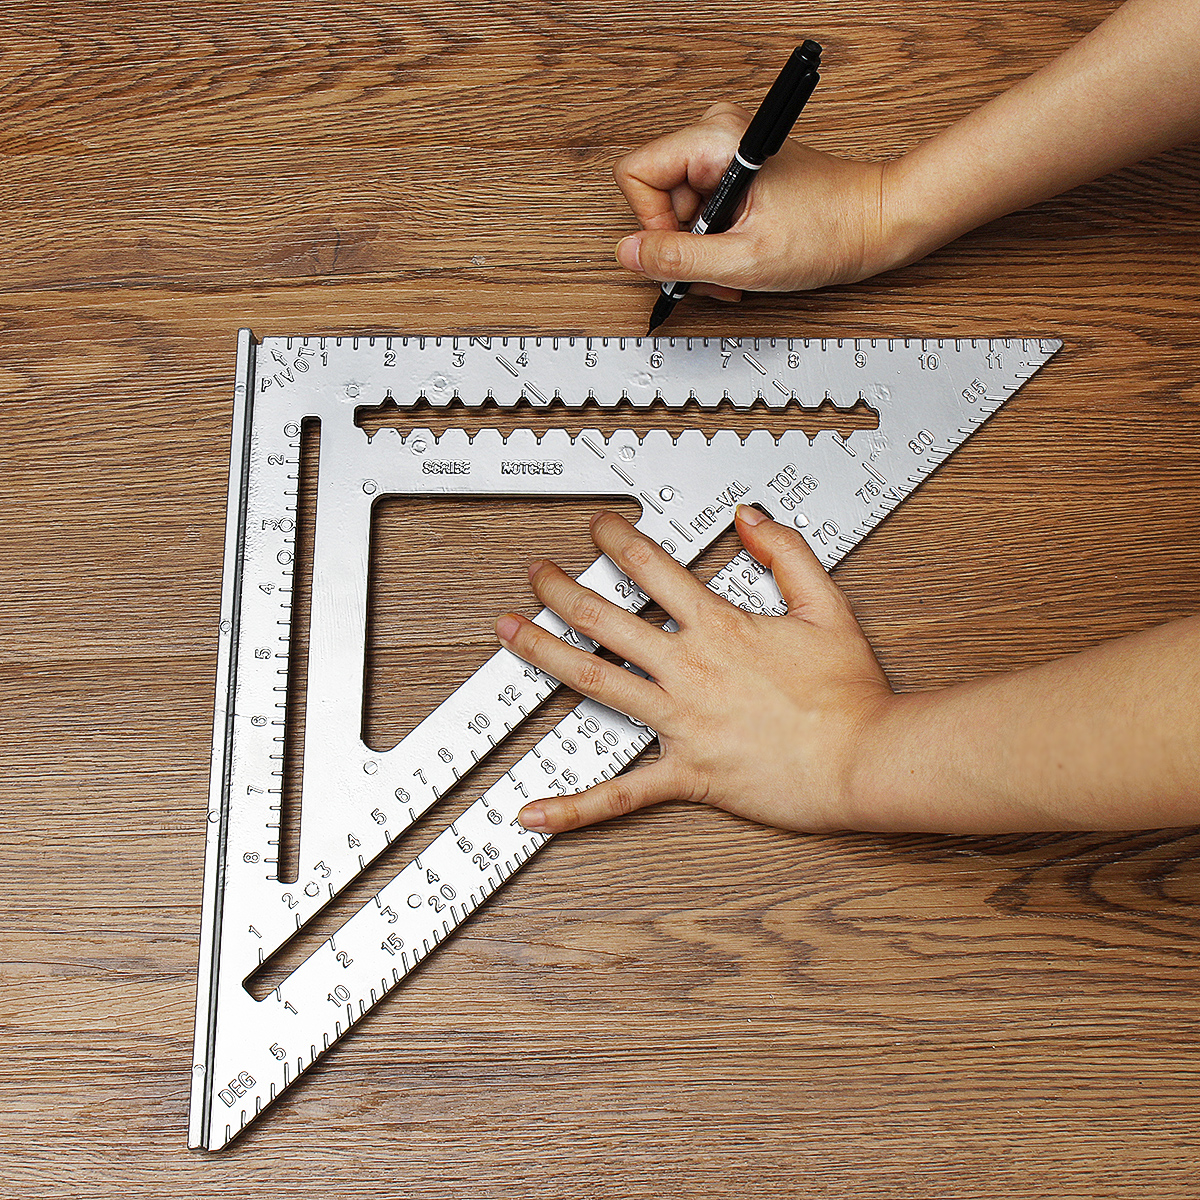 12inch-Aluminum-Alloy-Right-Angle-Triangle-Ruler-Protractor-Framing-Measuring-Tools-1597414-8